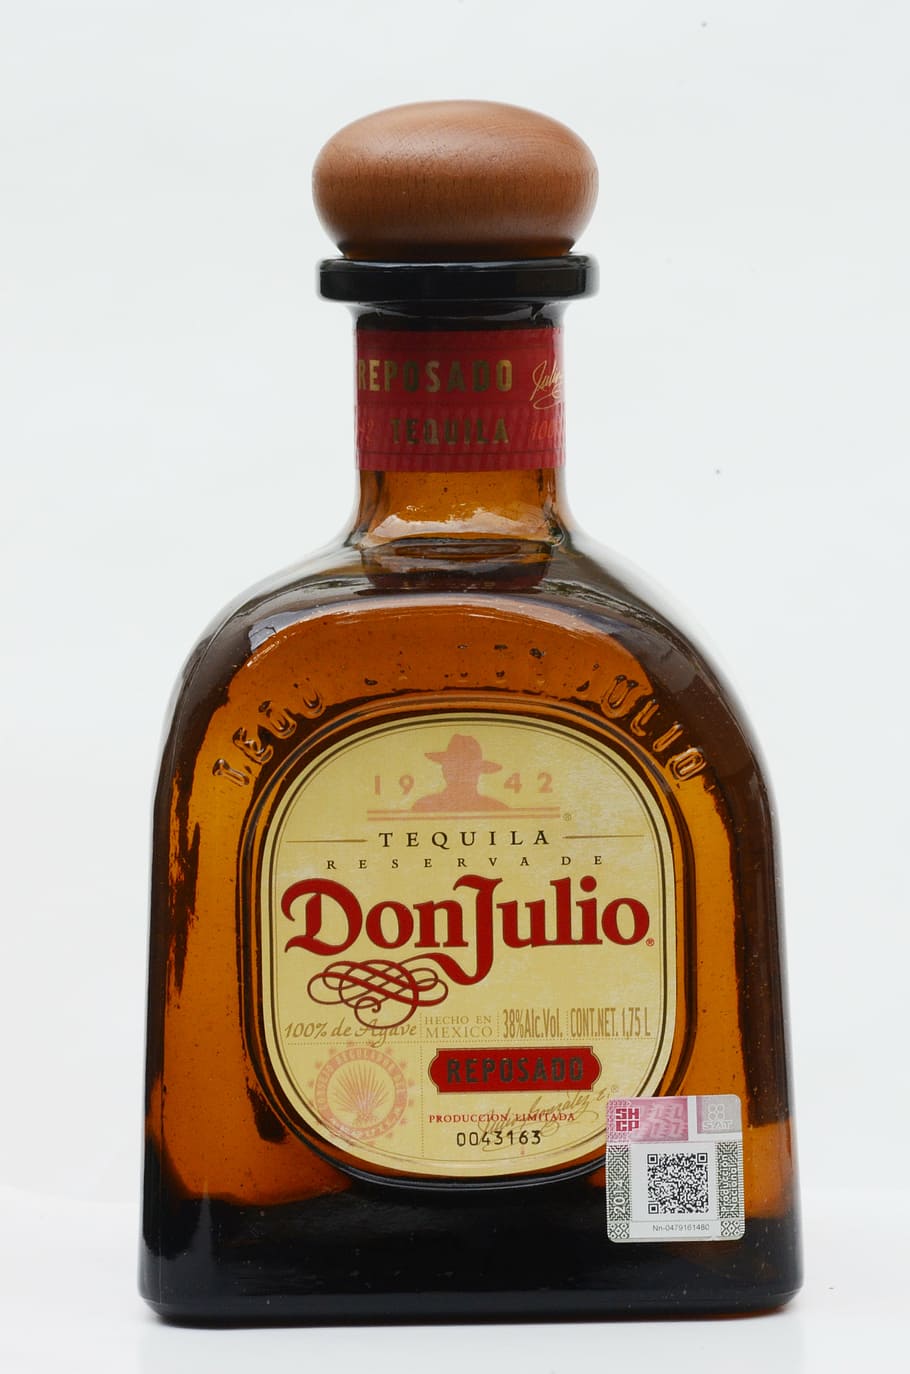 don julio tequila, premium tequila, tequila jalisco, mexican tequila